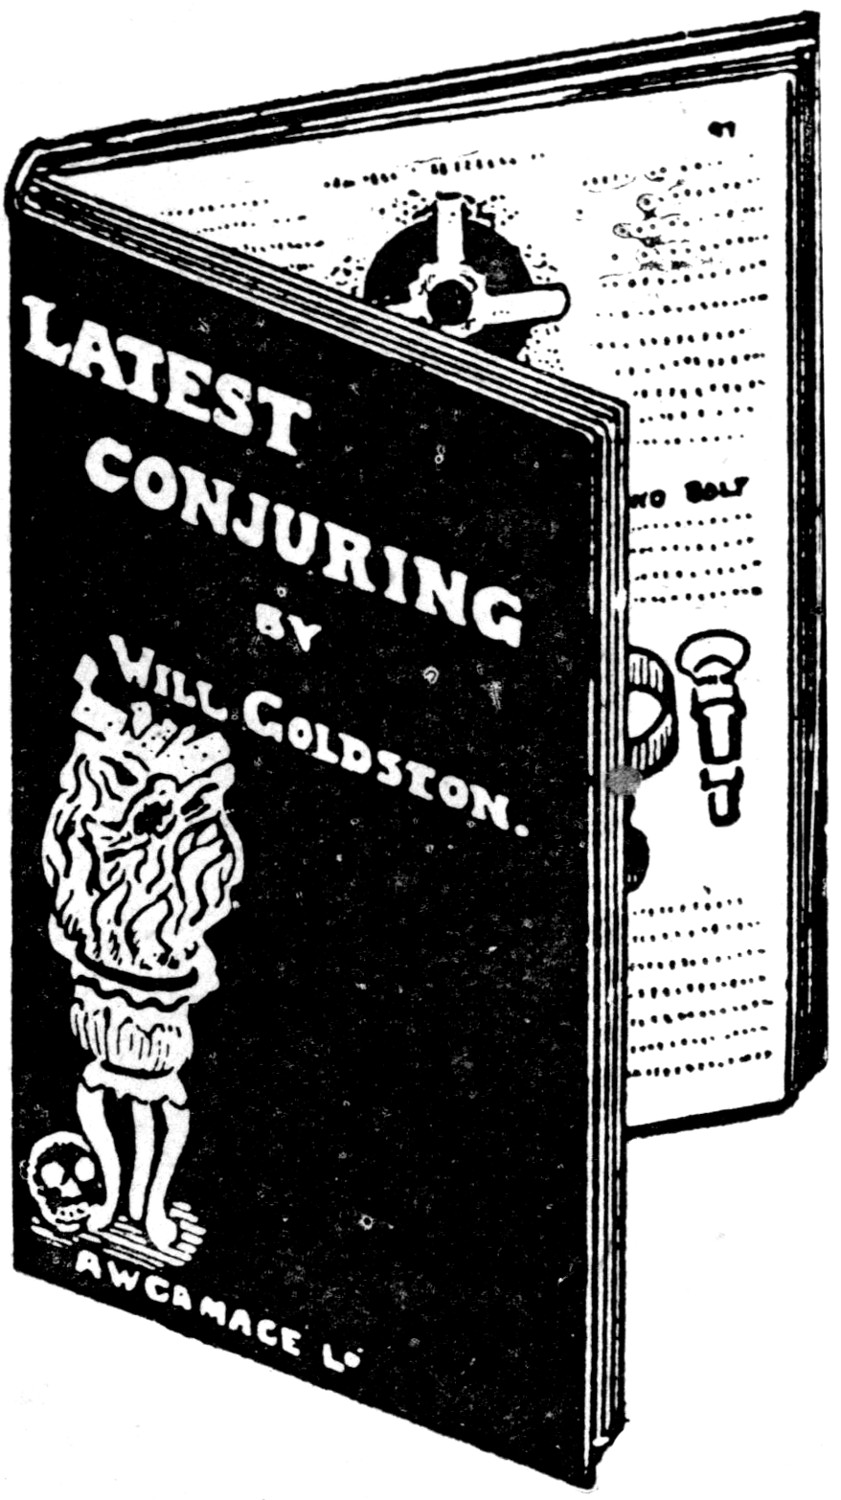 Latest Conjuring By WILL GOLDSTON